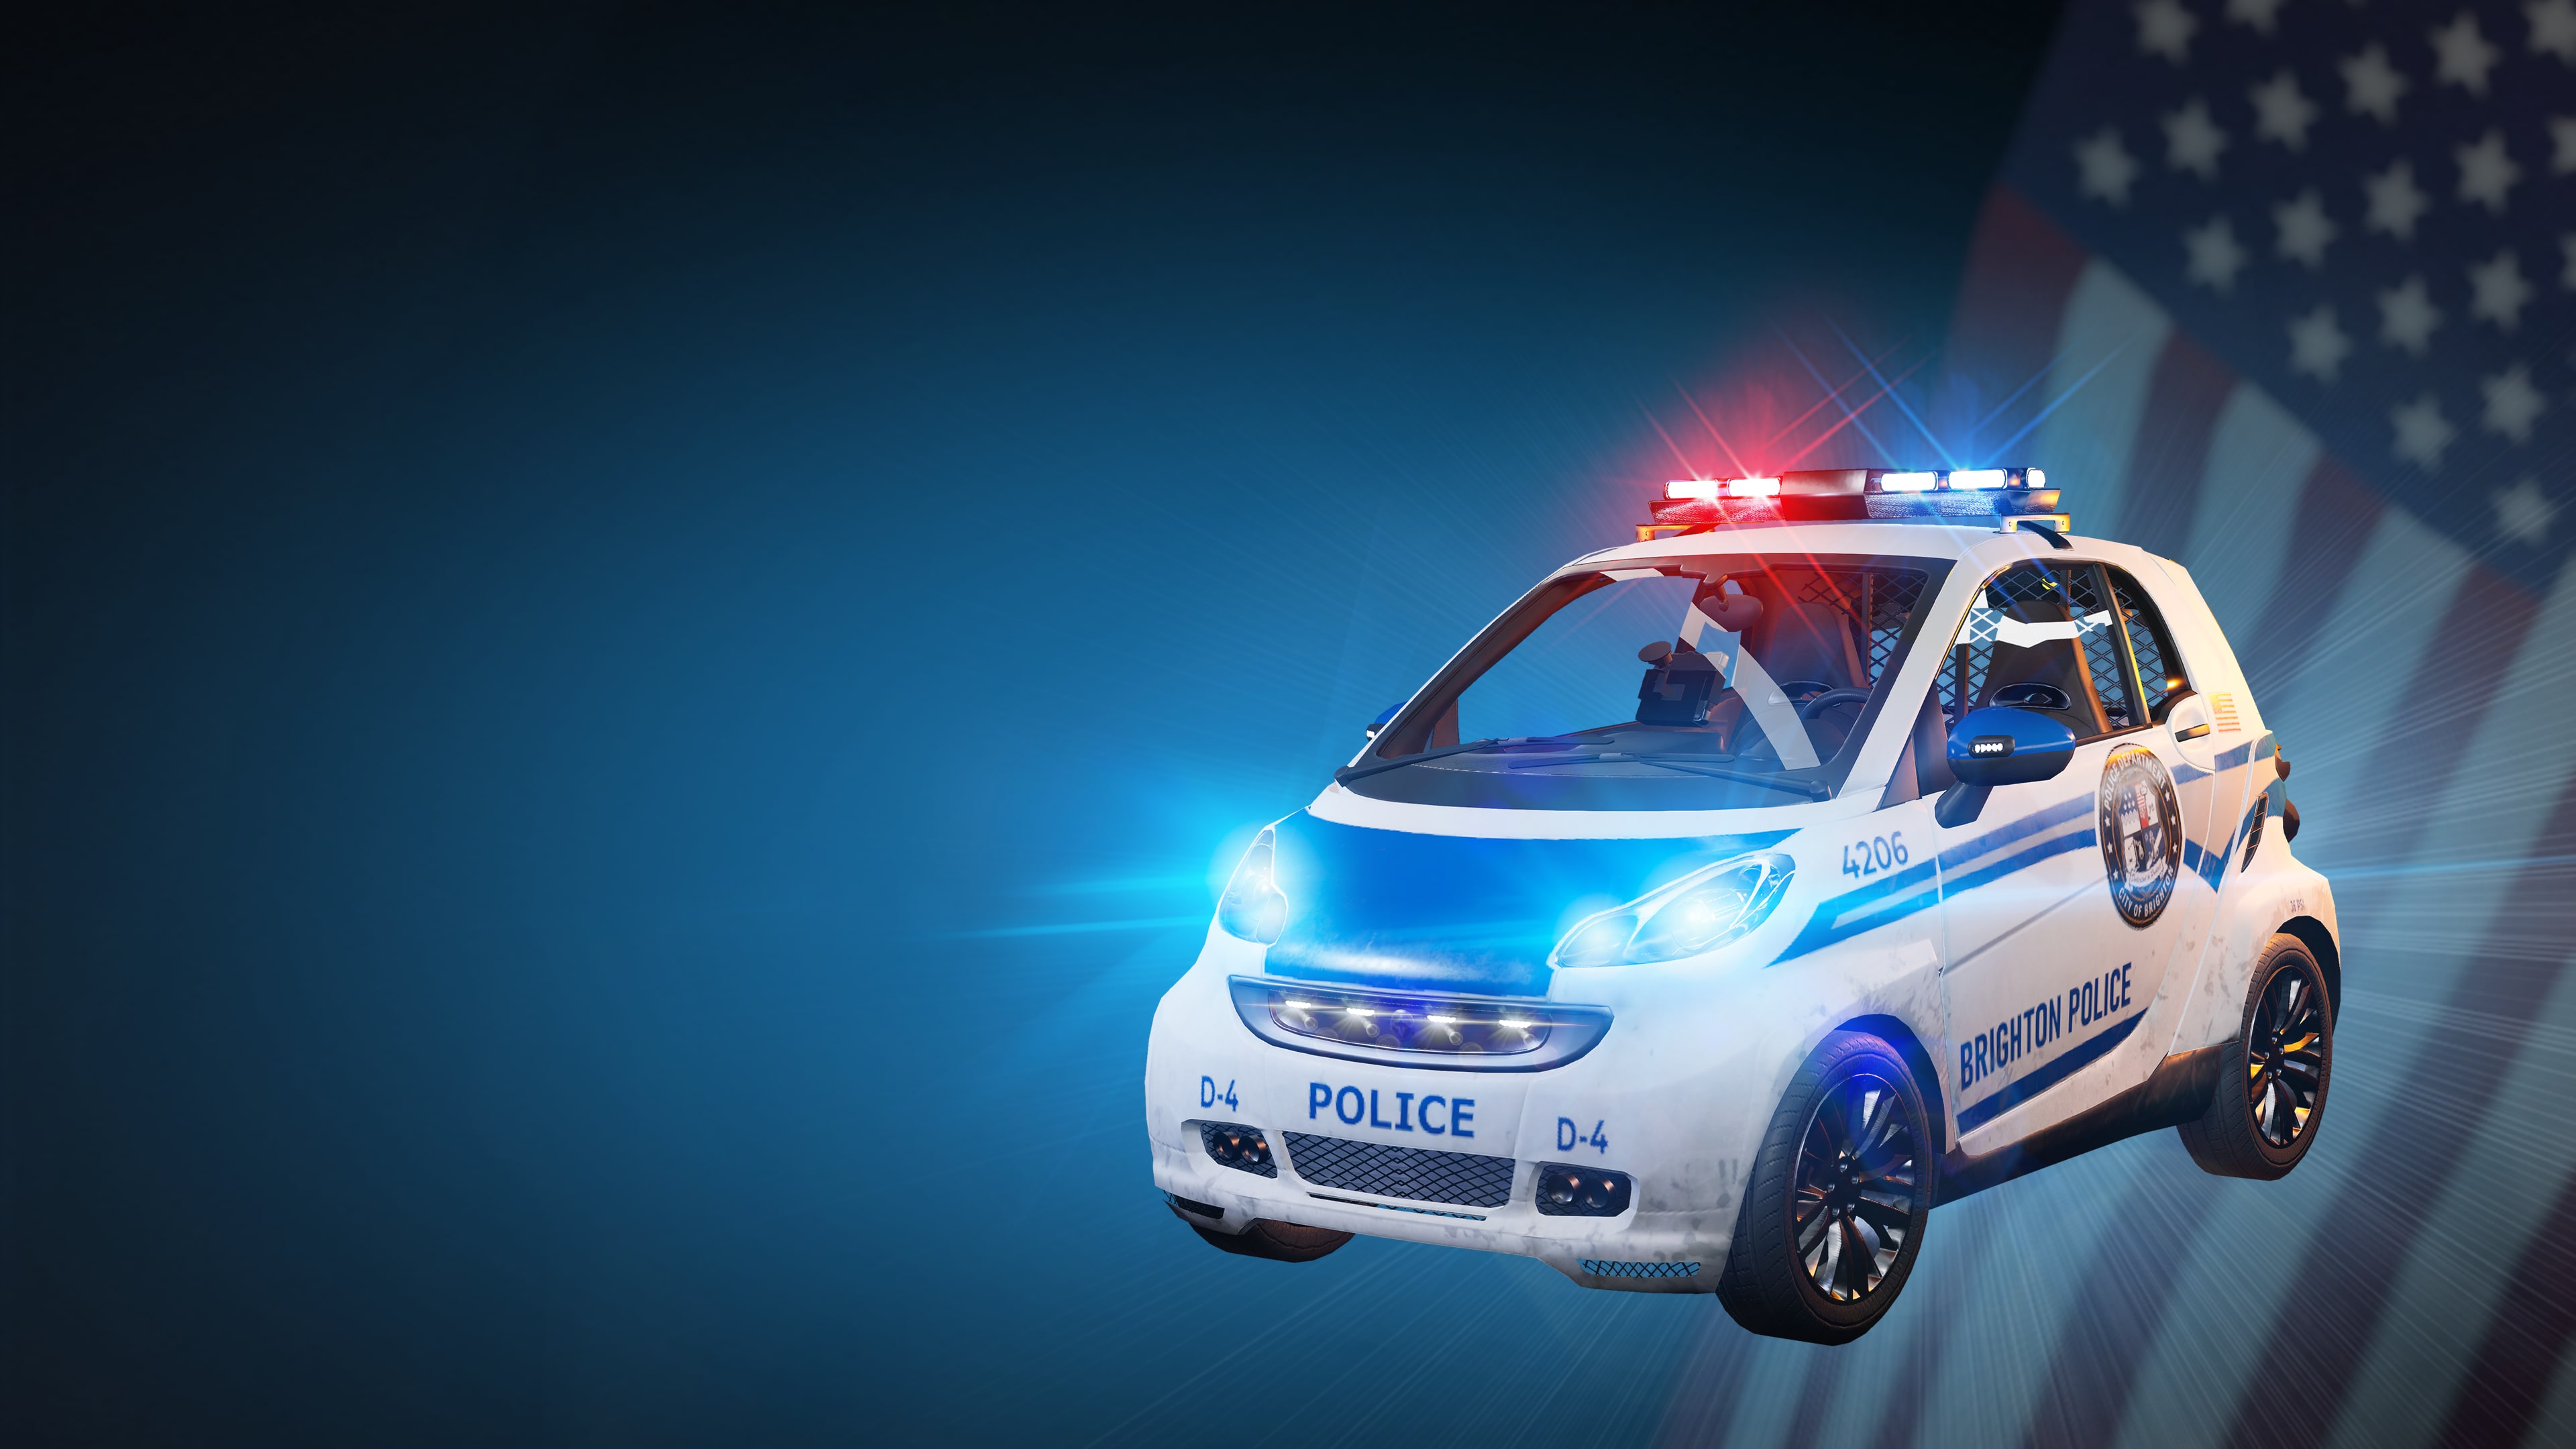 Police Vehicle Police DLC : Compact Patrol Officers Simulator: